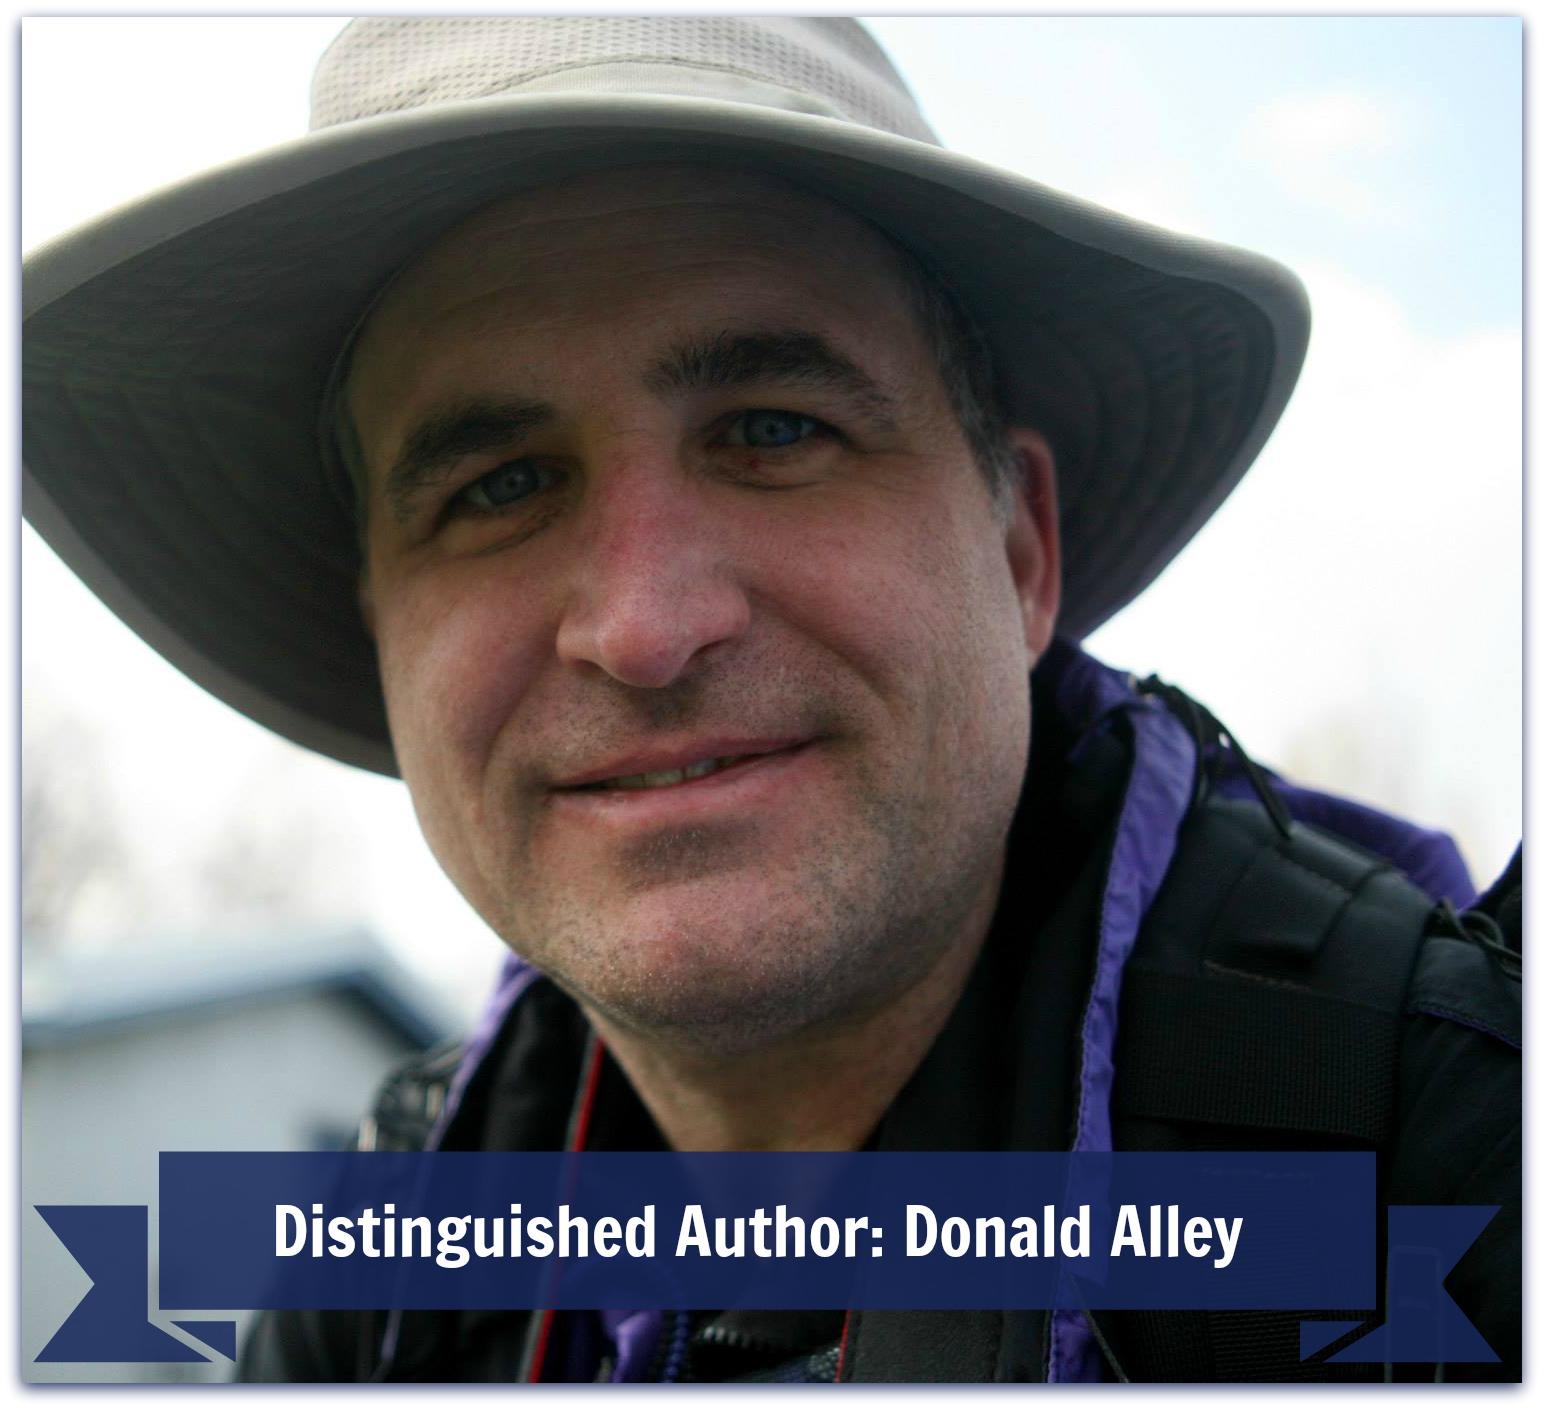 Distinguished Author Profile: Donald Alley